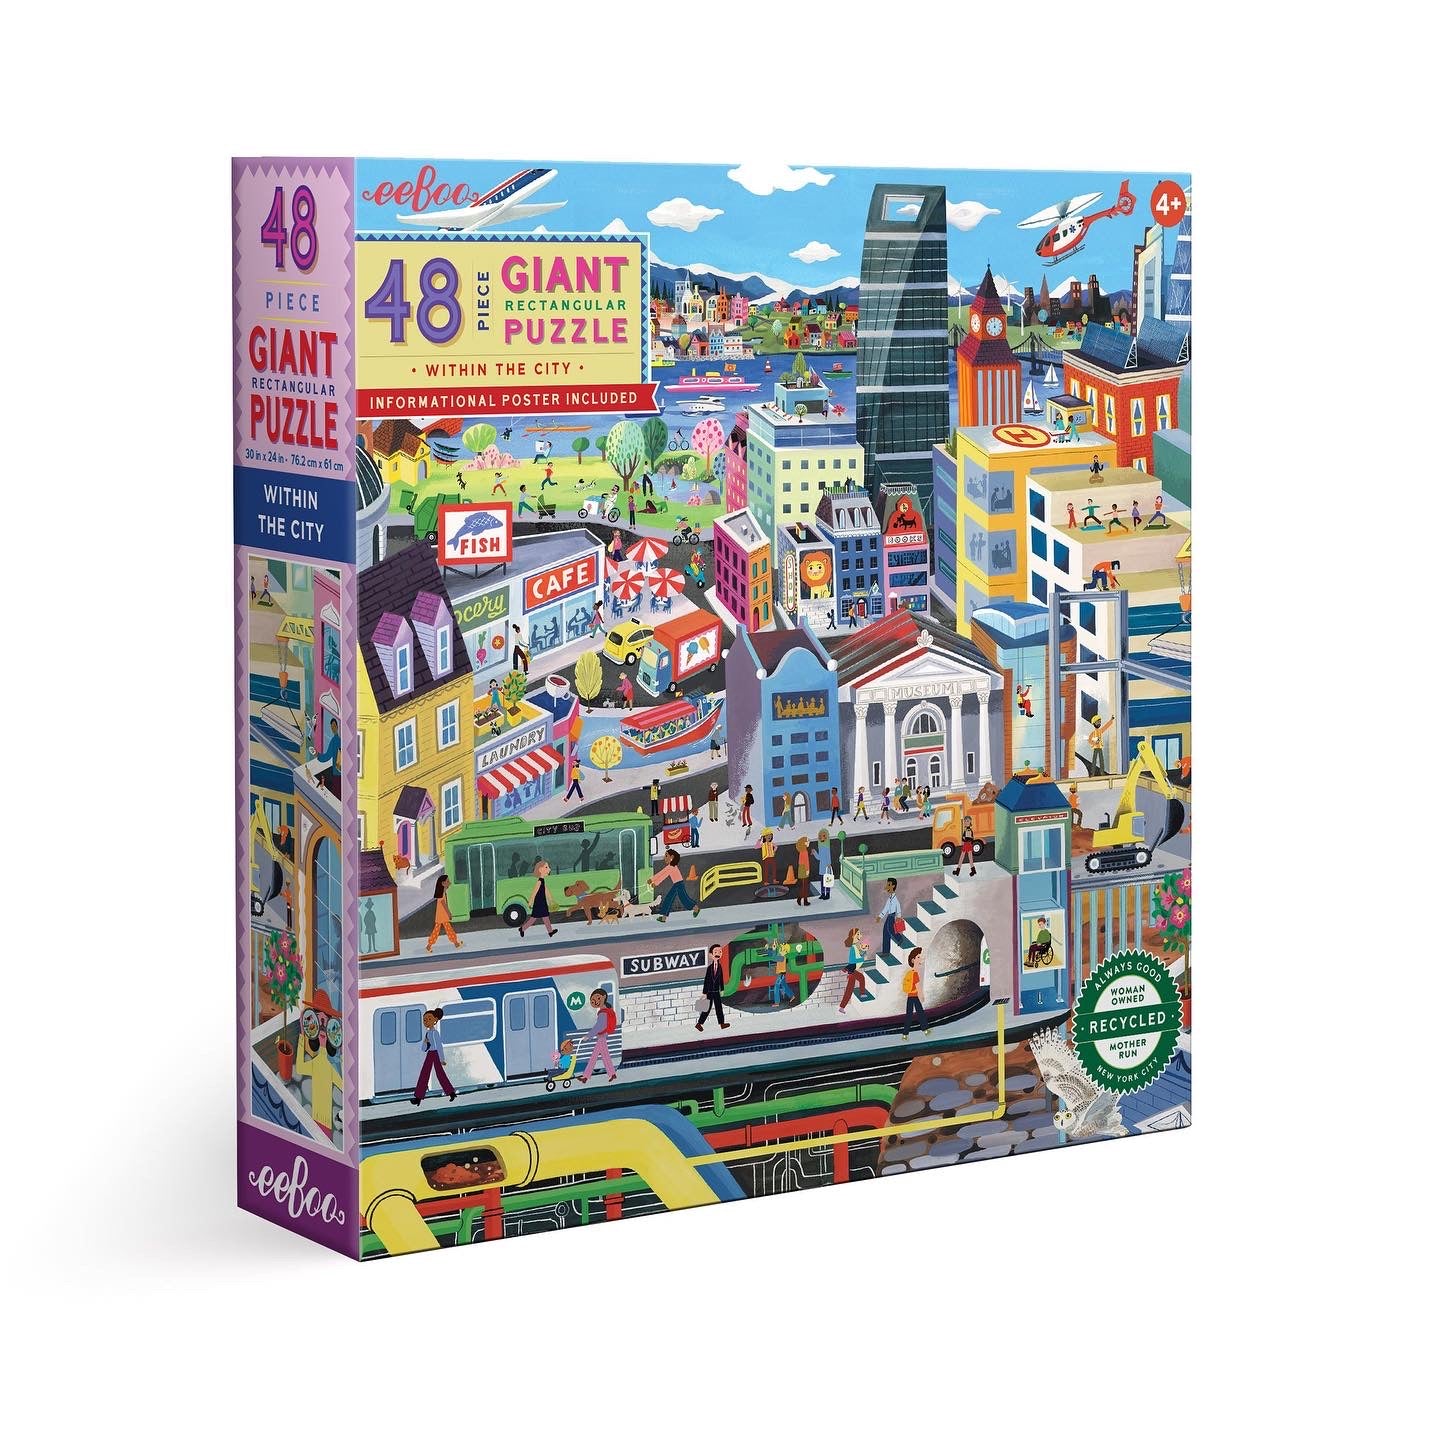 Within the City 48 piece Giant Puzzle